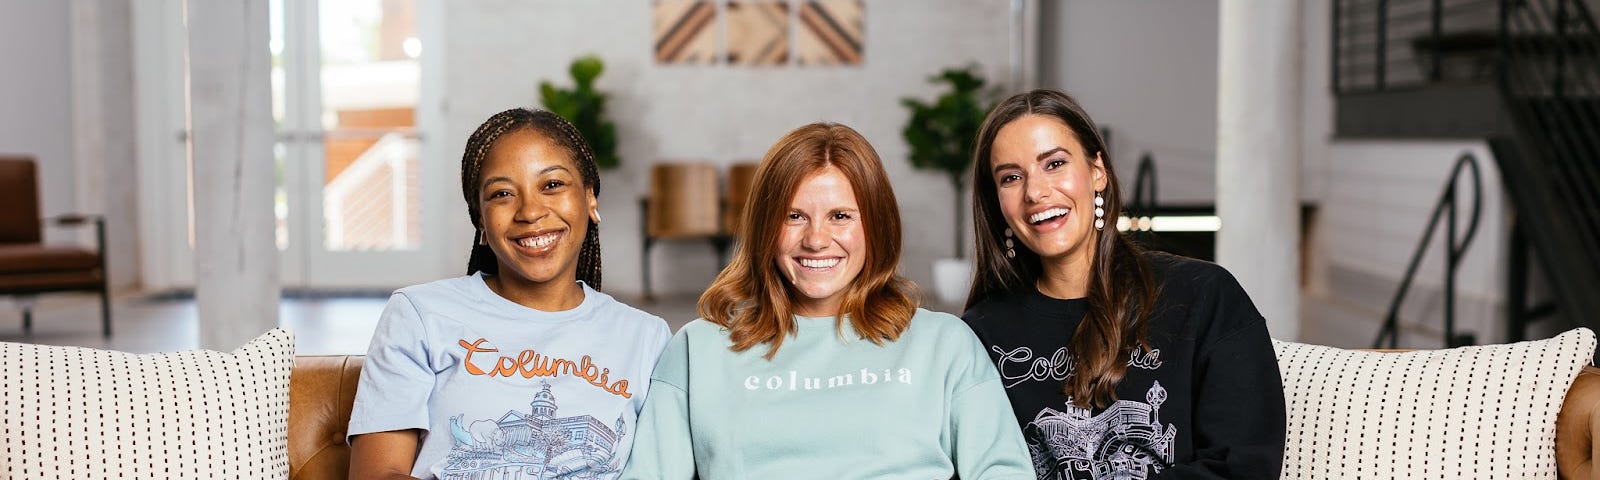 Three women, one Black and two white, sit on a leather couch in a bright, airy loft-style space. They model Six & Main long- and short-sleeved shirts with Columbia, South Carolina-specific designs on them, including the city name and landmarks.